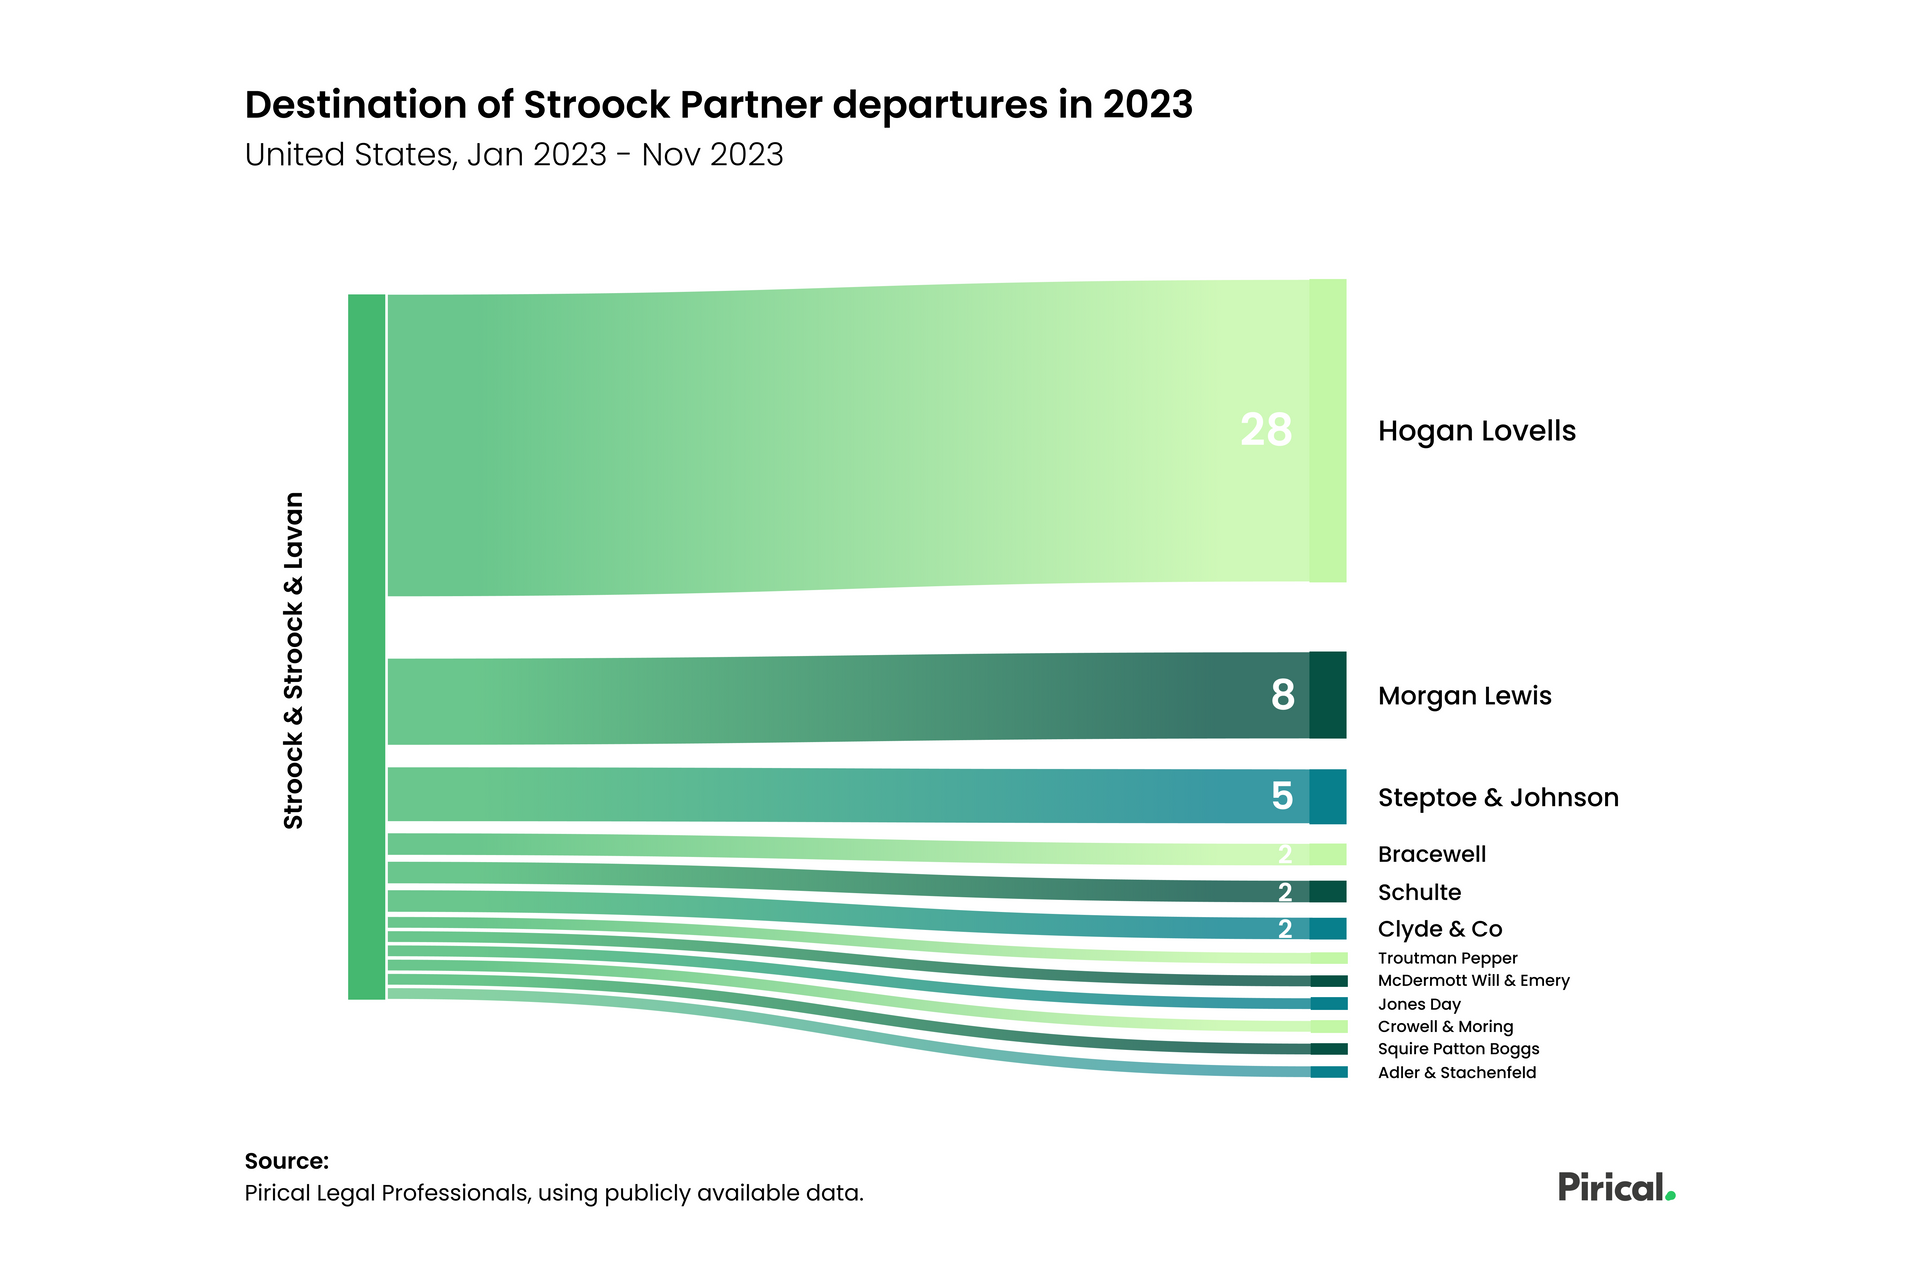 Where have Stroock Partners ended up in 2023